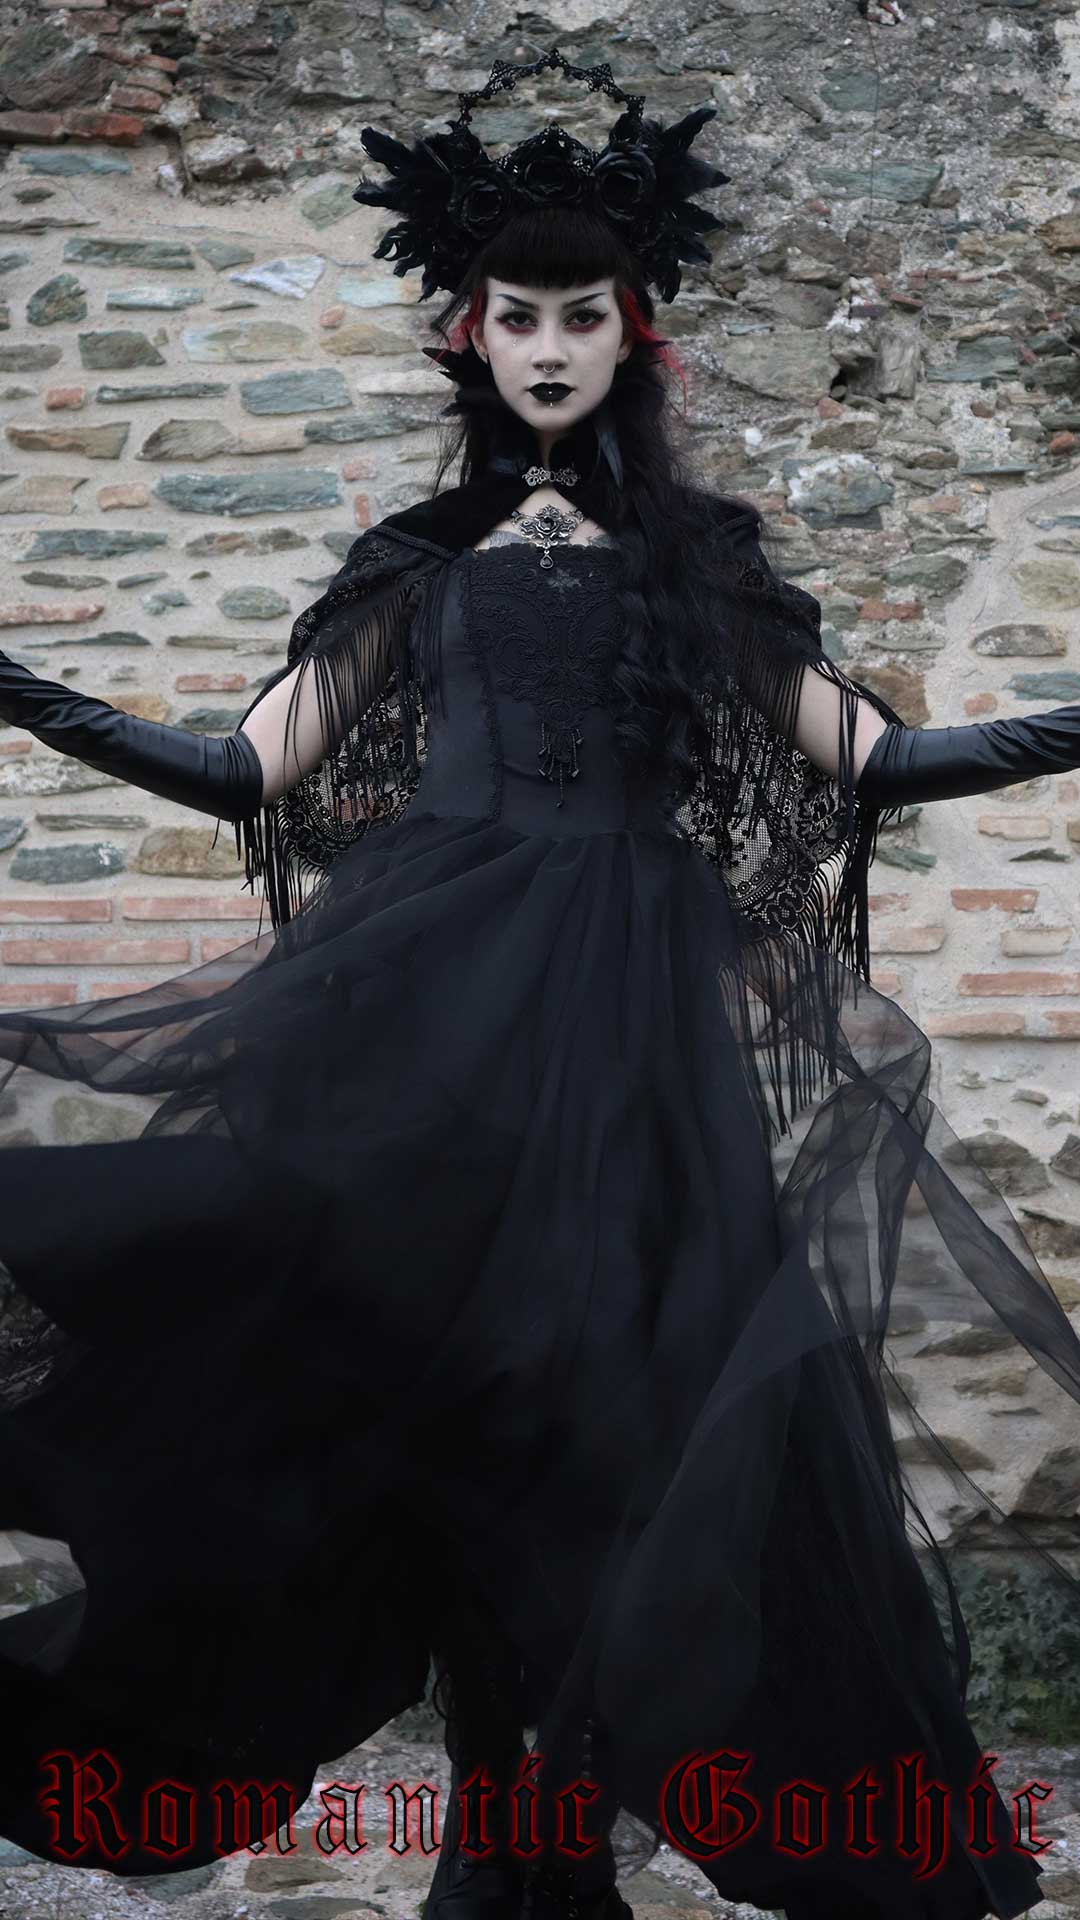 Gothic Lady Astarothy is wearing a Romantic Gothic dress and accessories from the Fantasmagoria collection